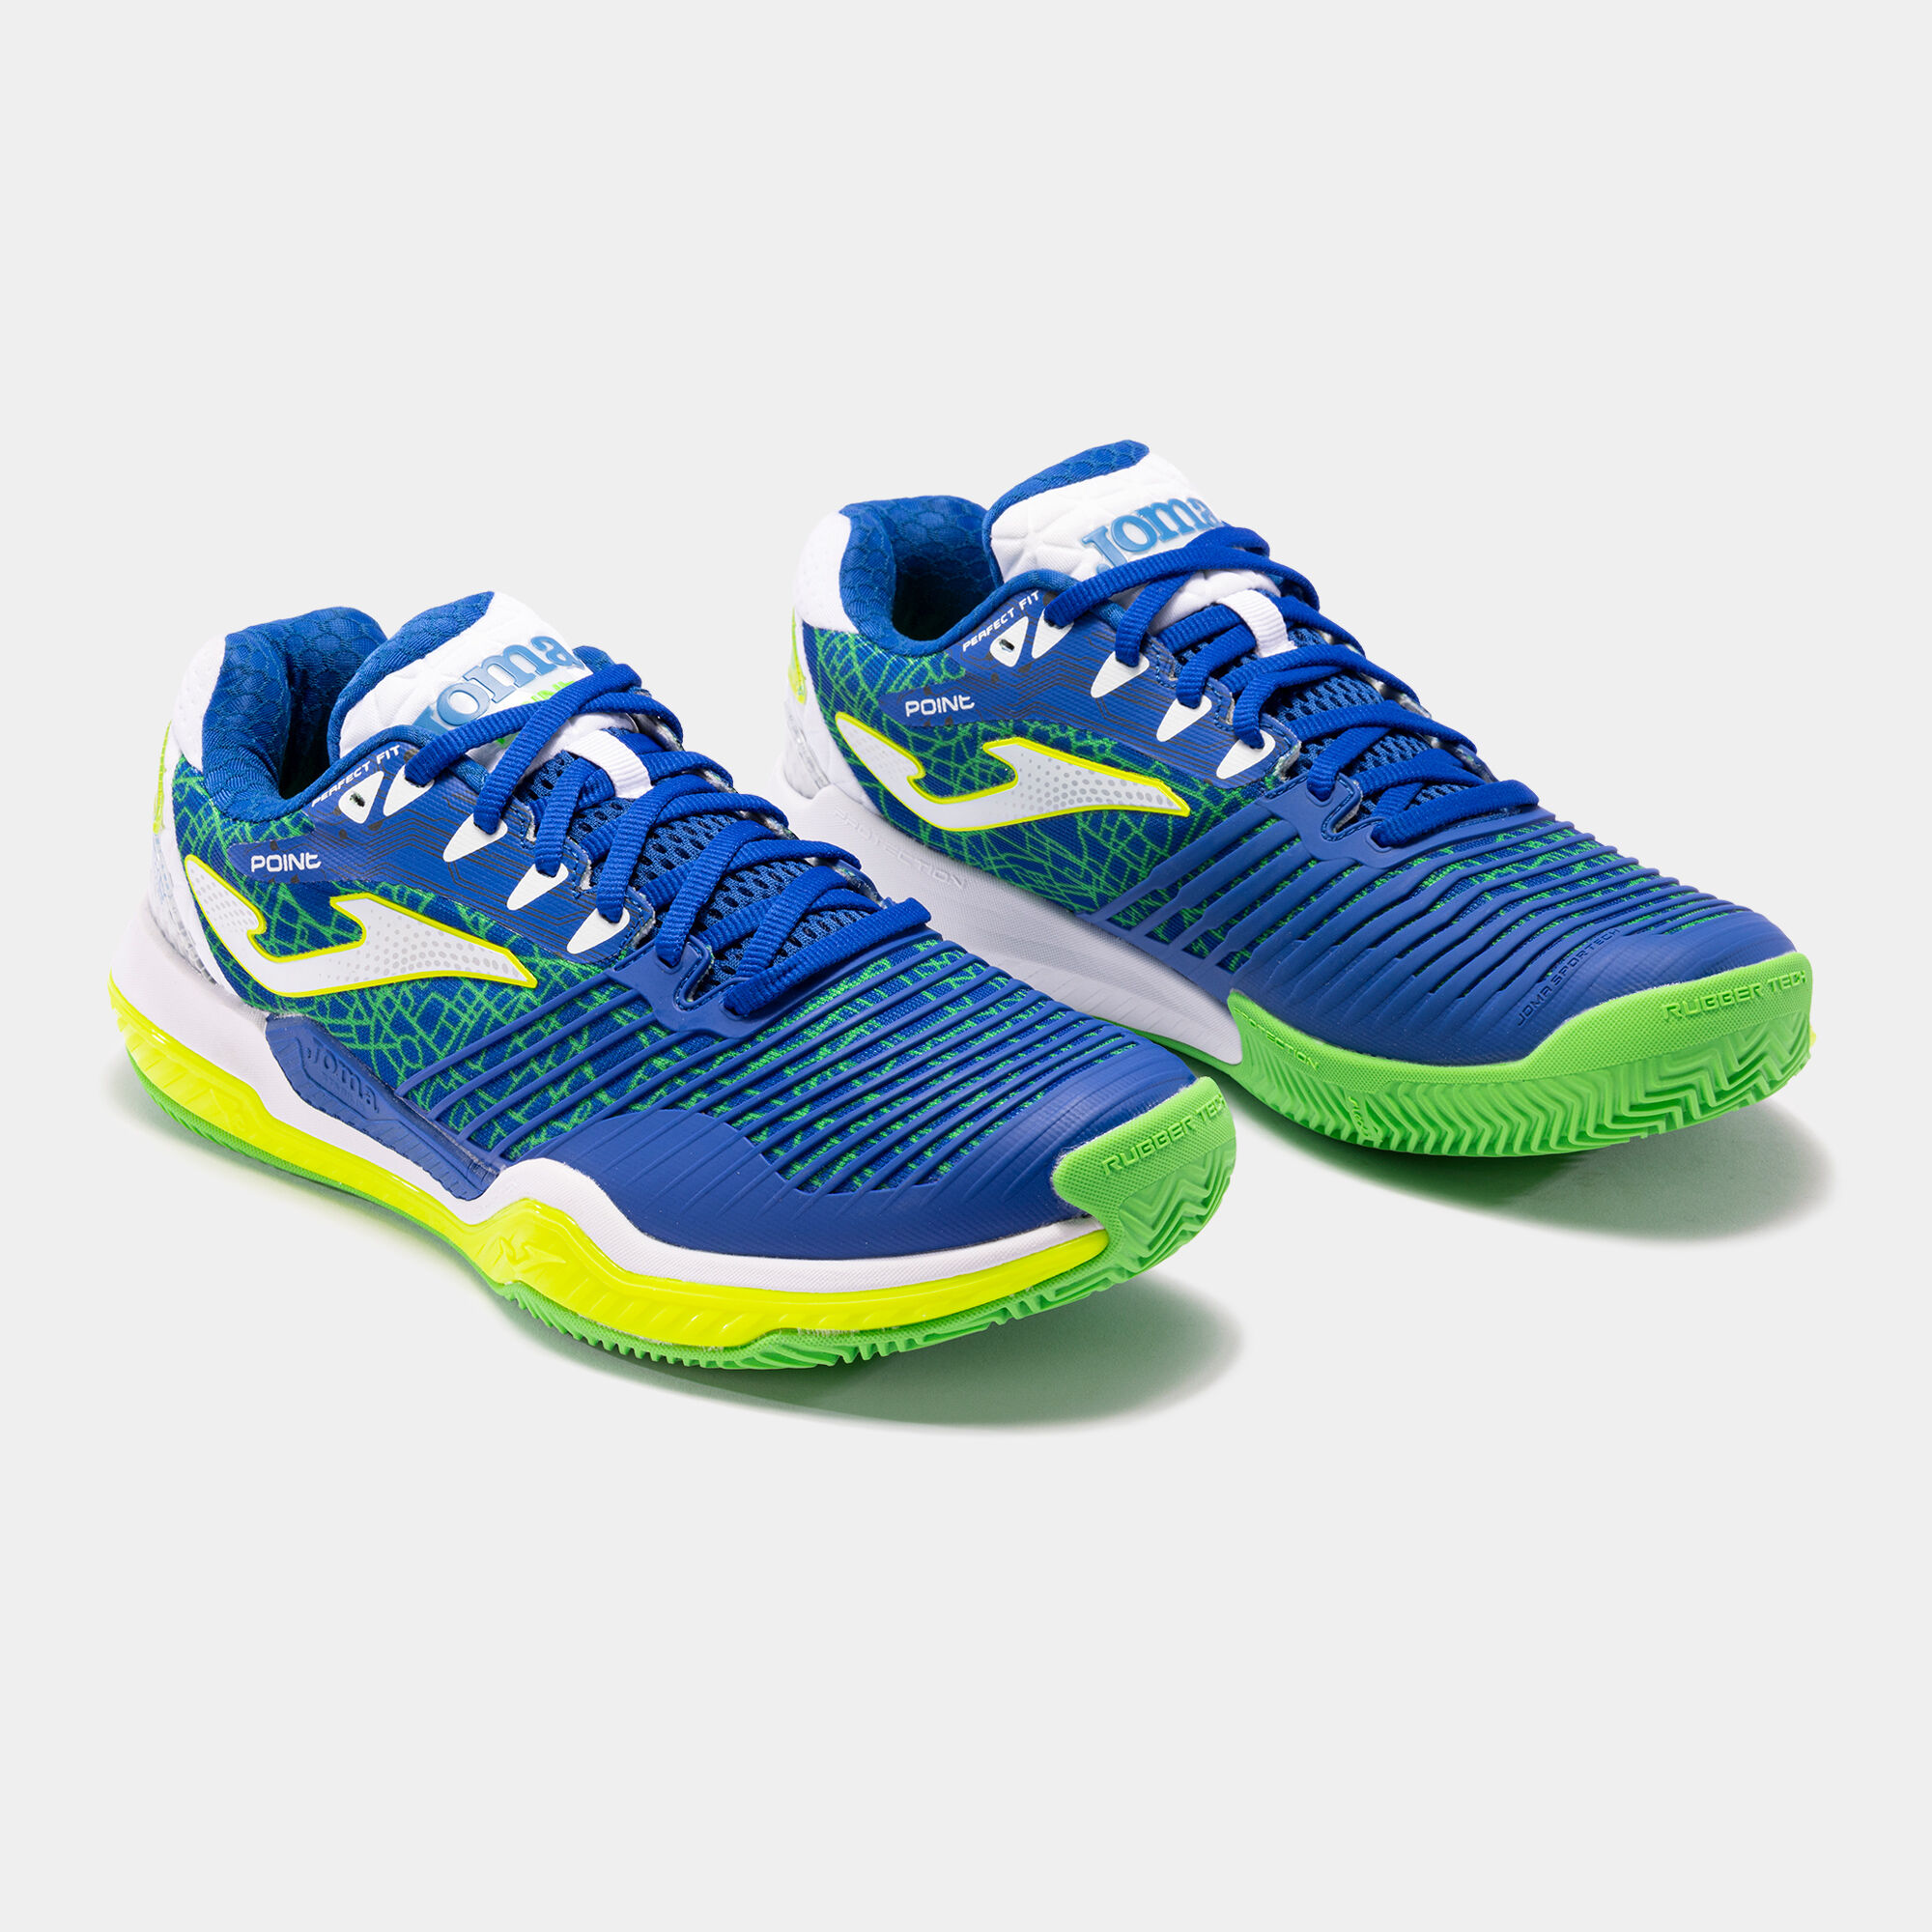 SHOES POINT 22 CLAY UNISEX ROYAL BLUE FLUORESCENT YELLOW